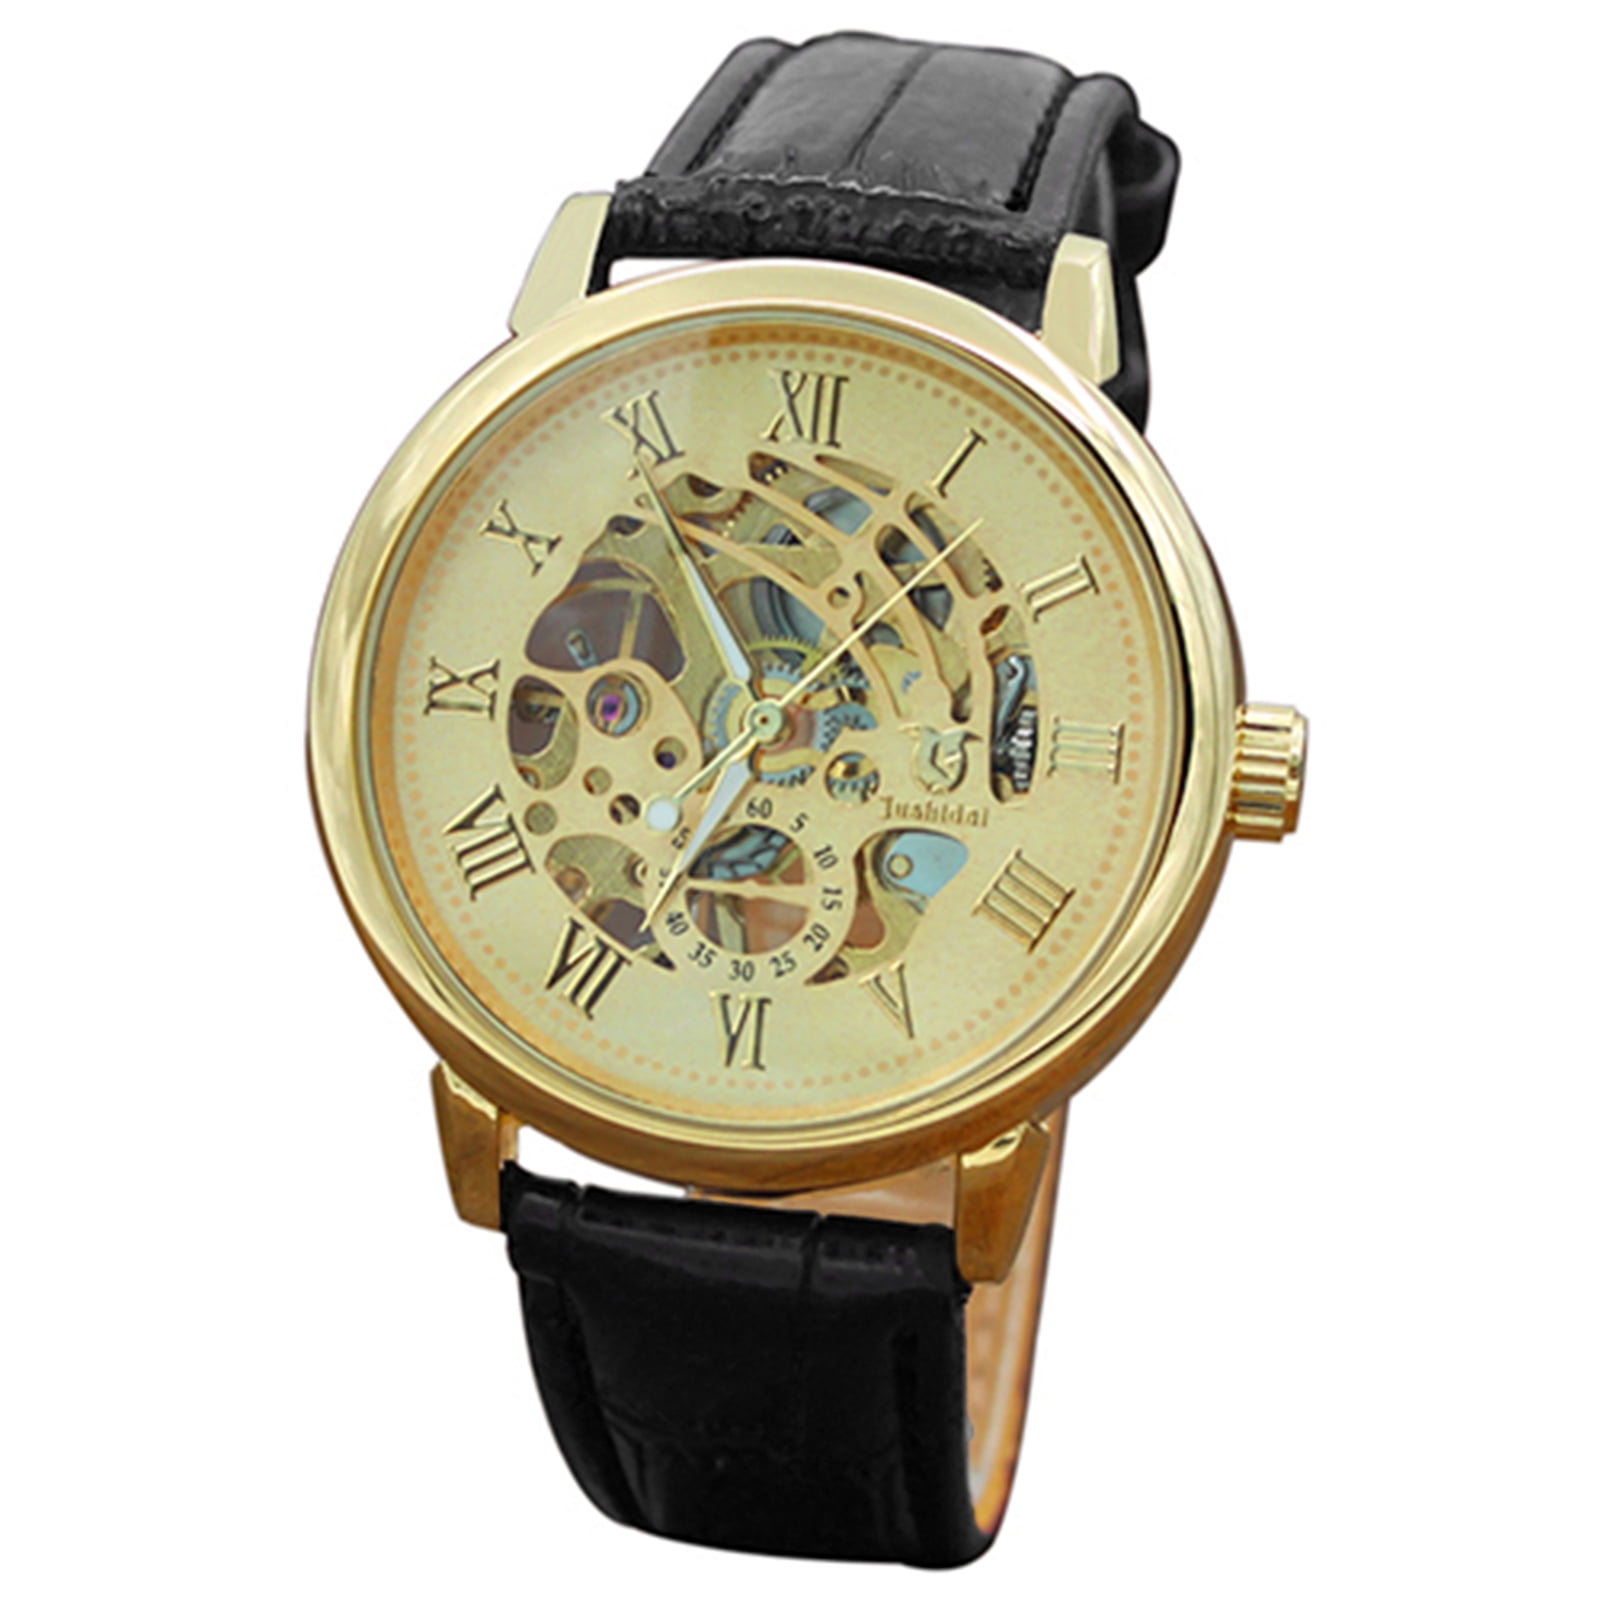 Square Roman Tank Dial Men Watch 40MM Mechanical Full Stainless Steel  Automatic 2813 Movement Business Clock Mens Day Date Classic Wristwatch  Montre De Luxe Gifts From Superwatchcity, $37.73